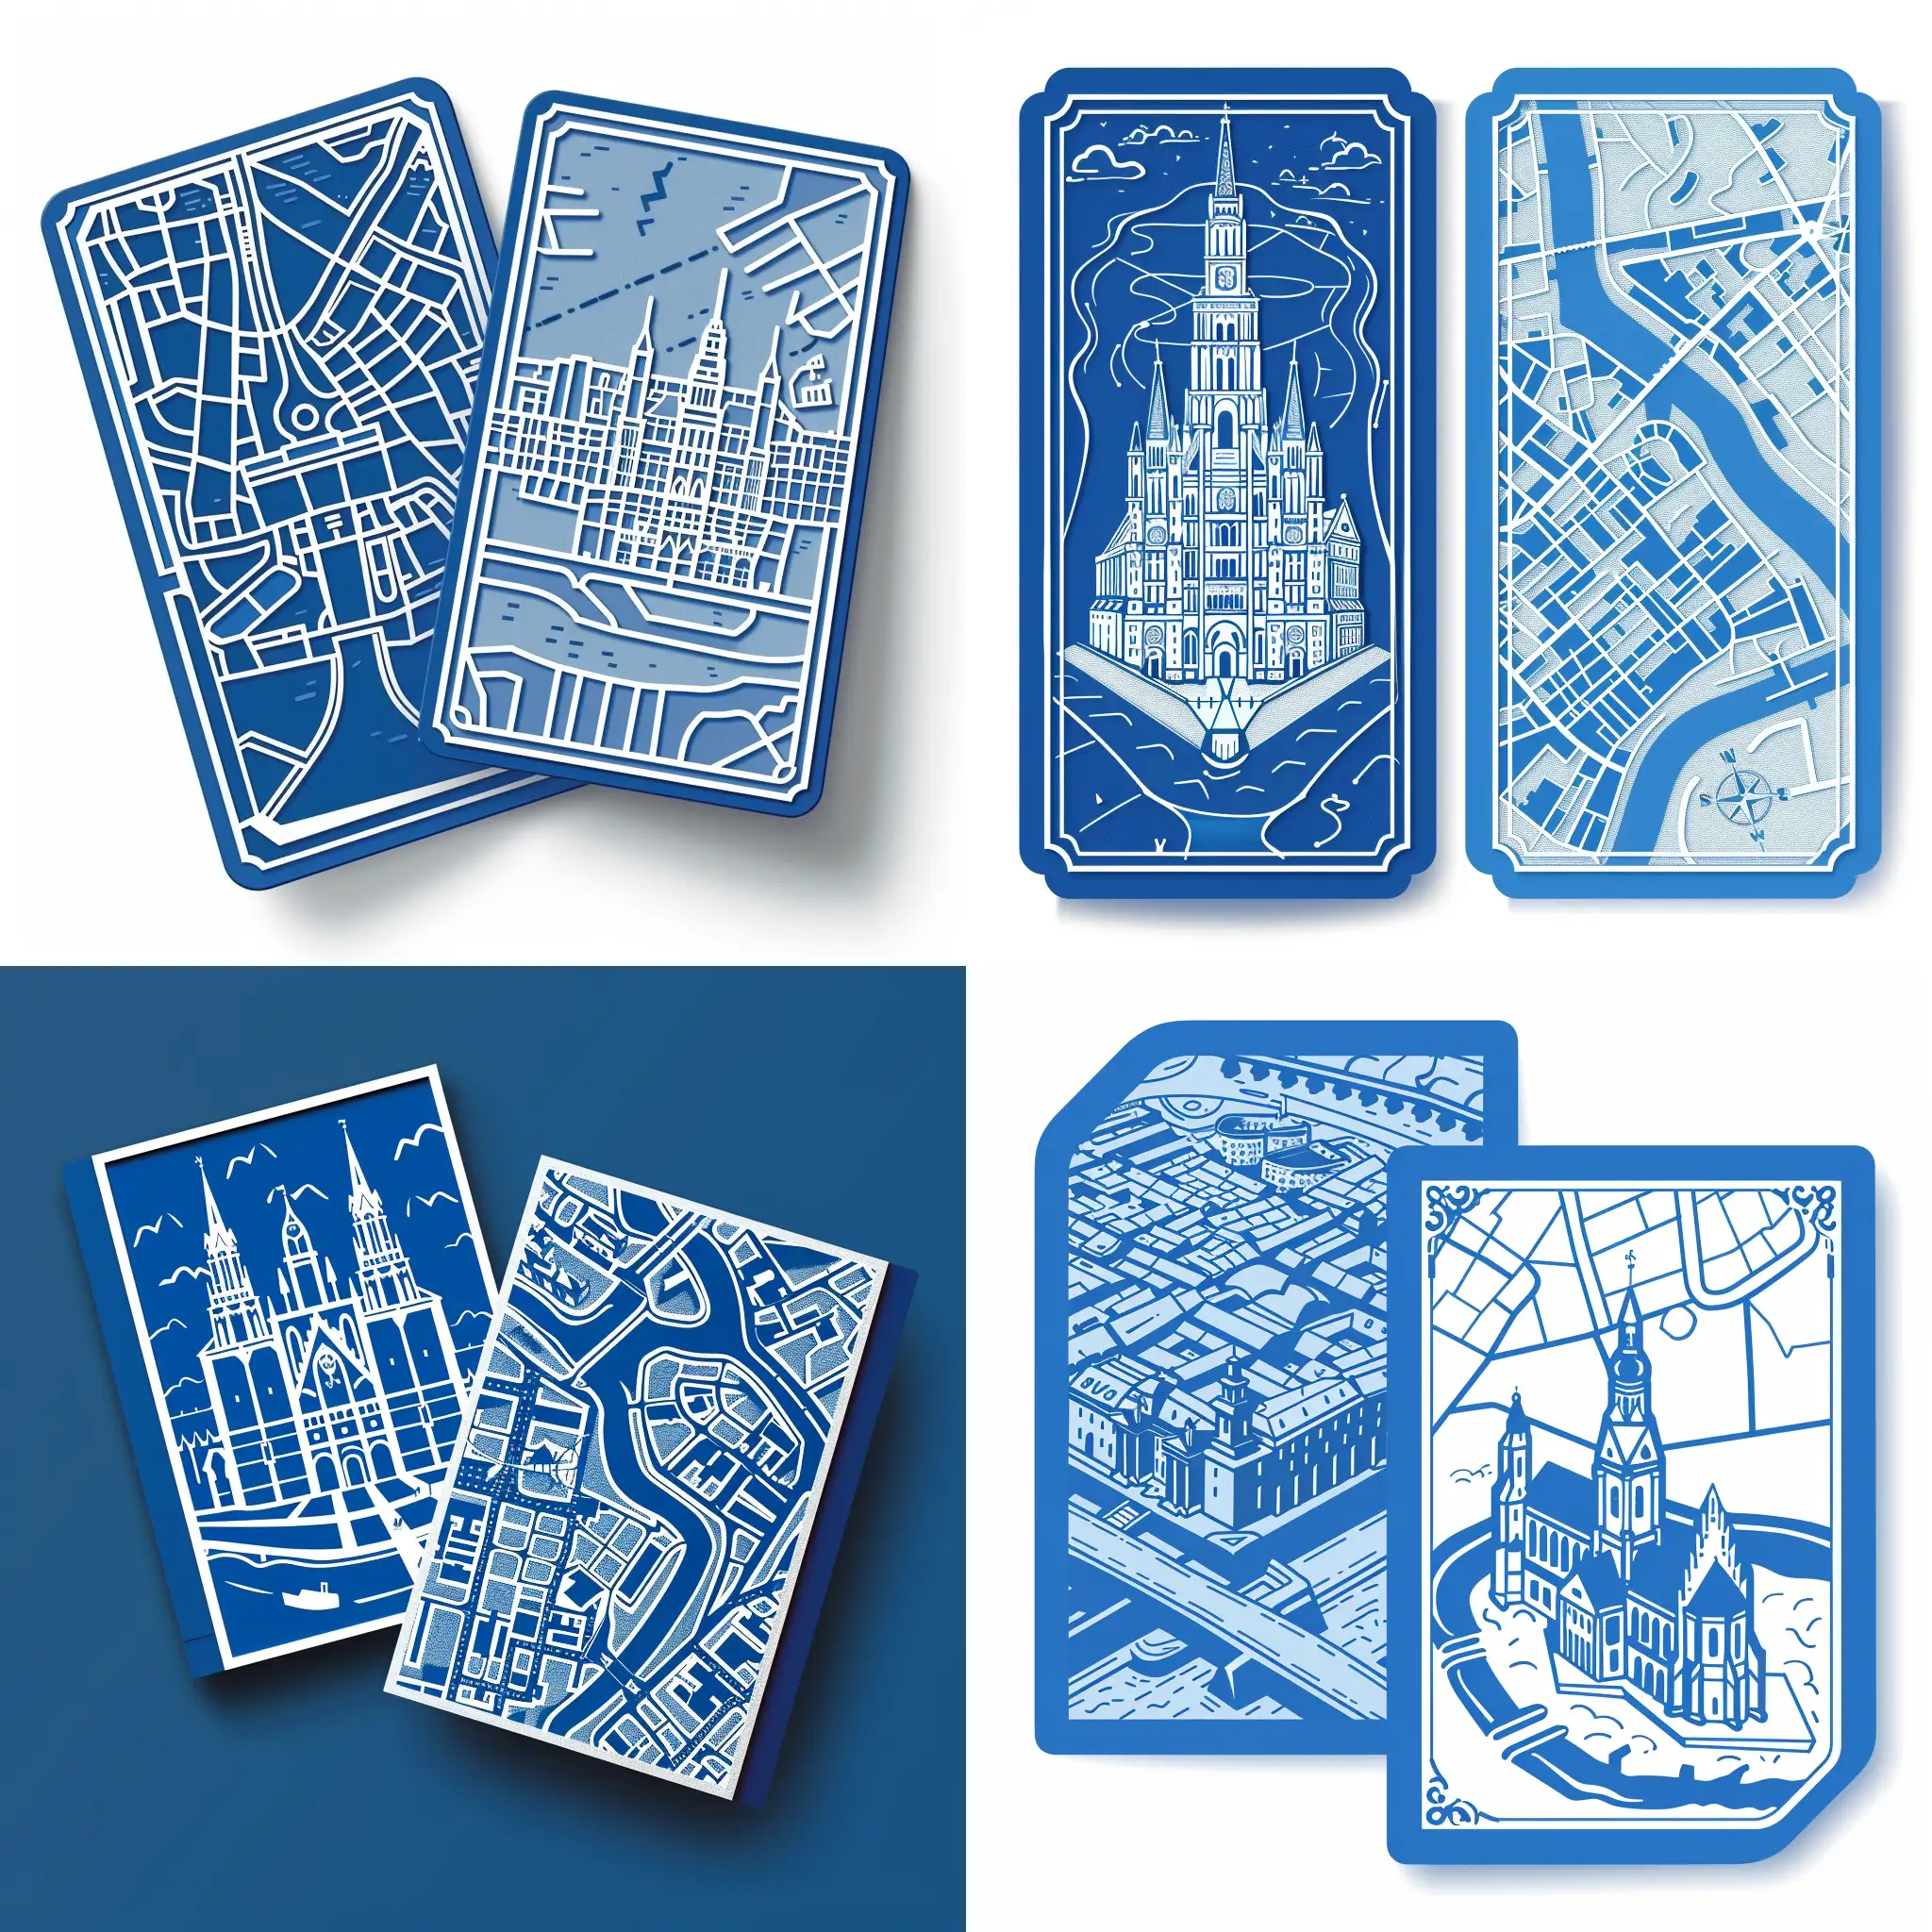 Wroclaw-City-Game-Logo-Blue-and-White-Design-Featuring-Map-and-Landmarks